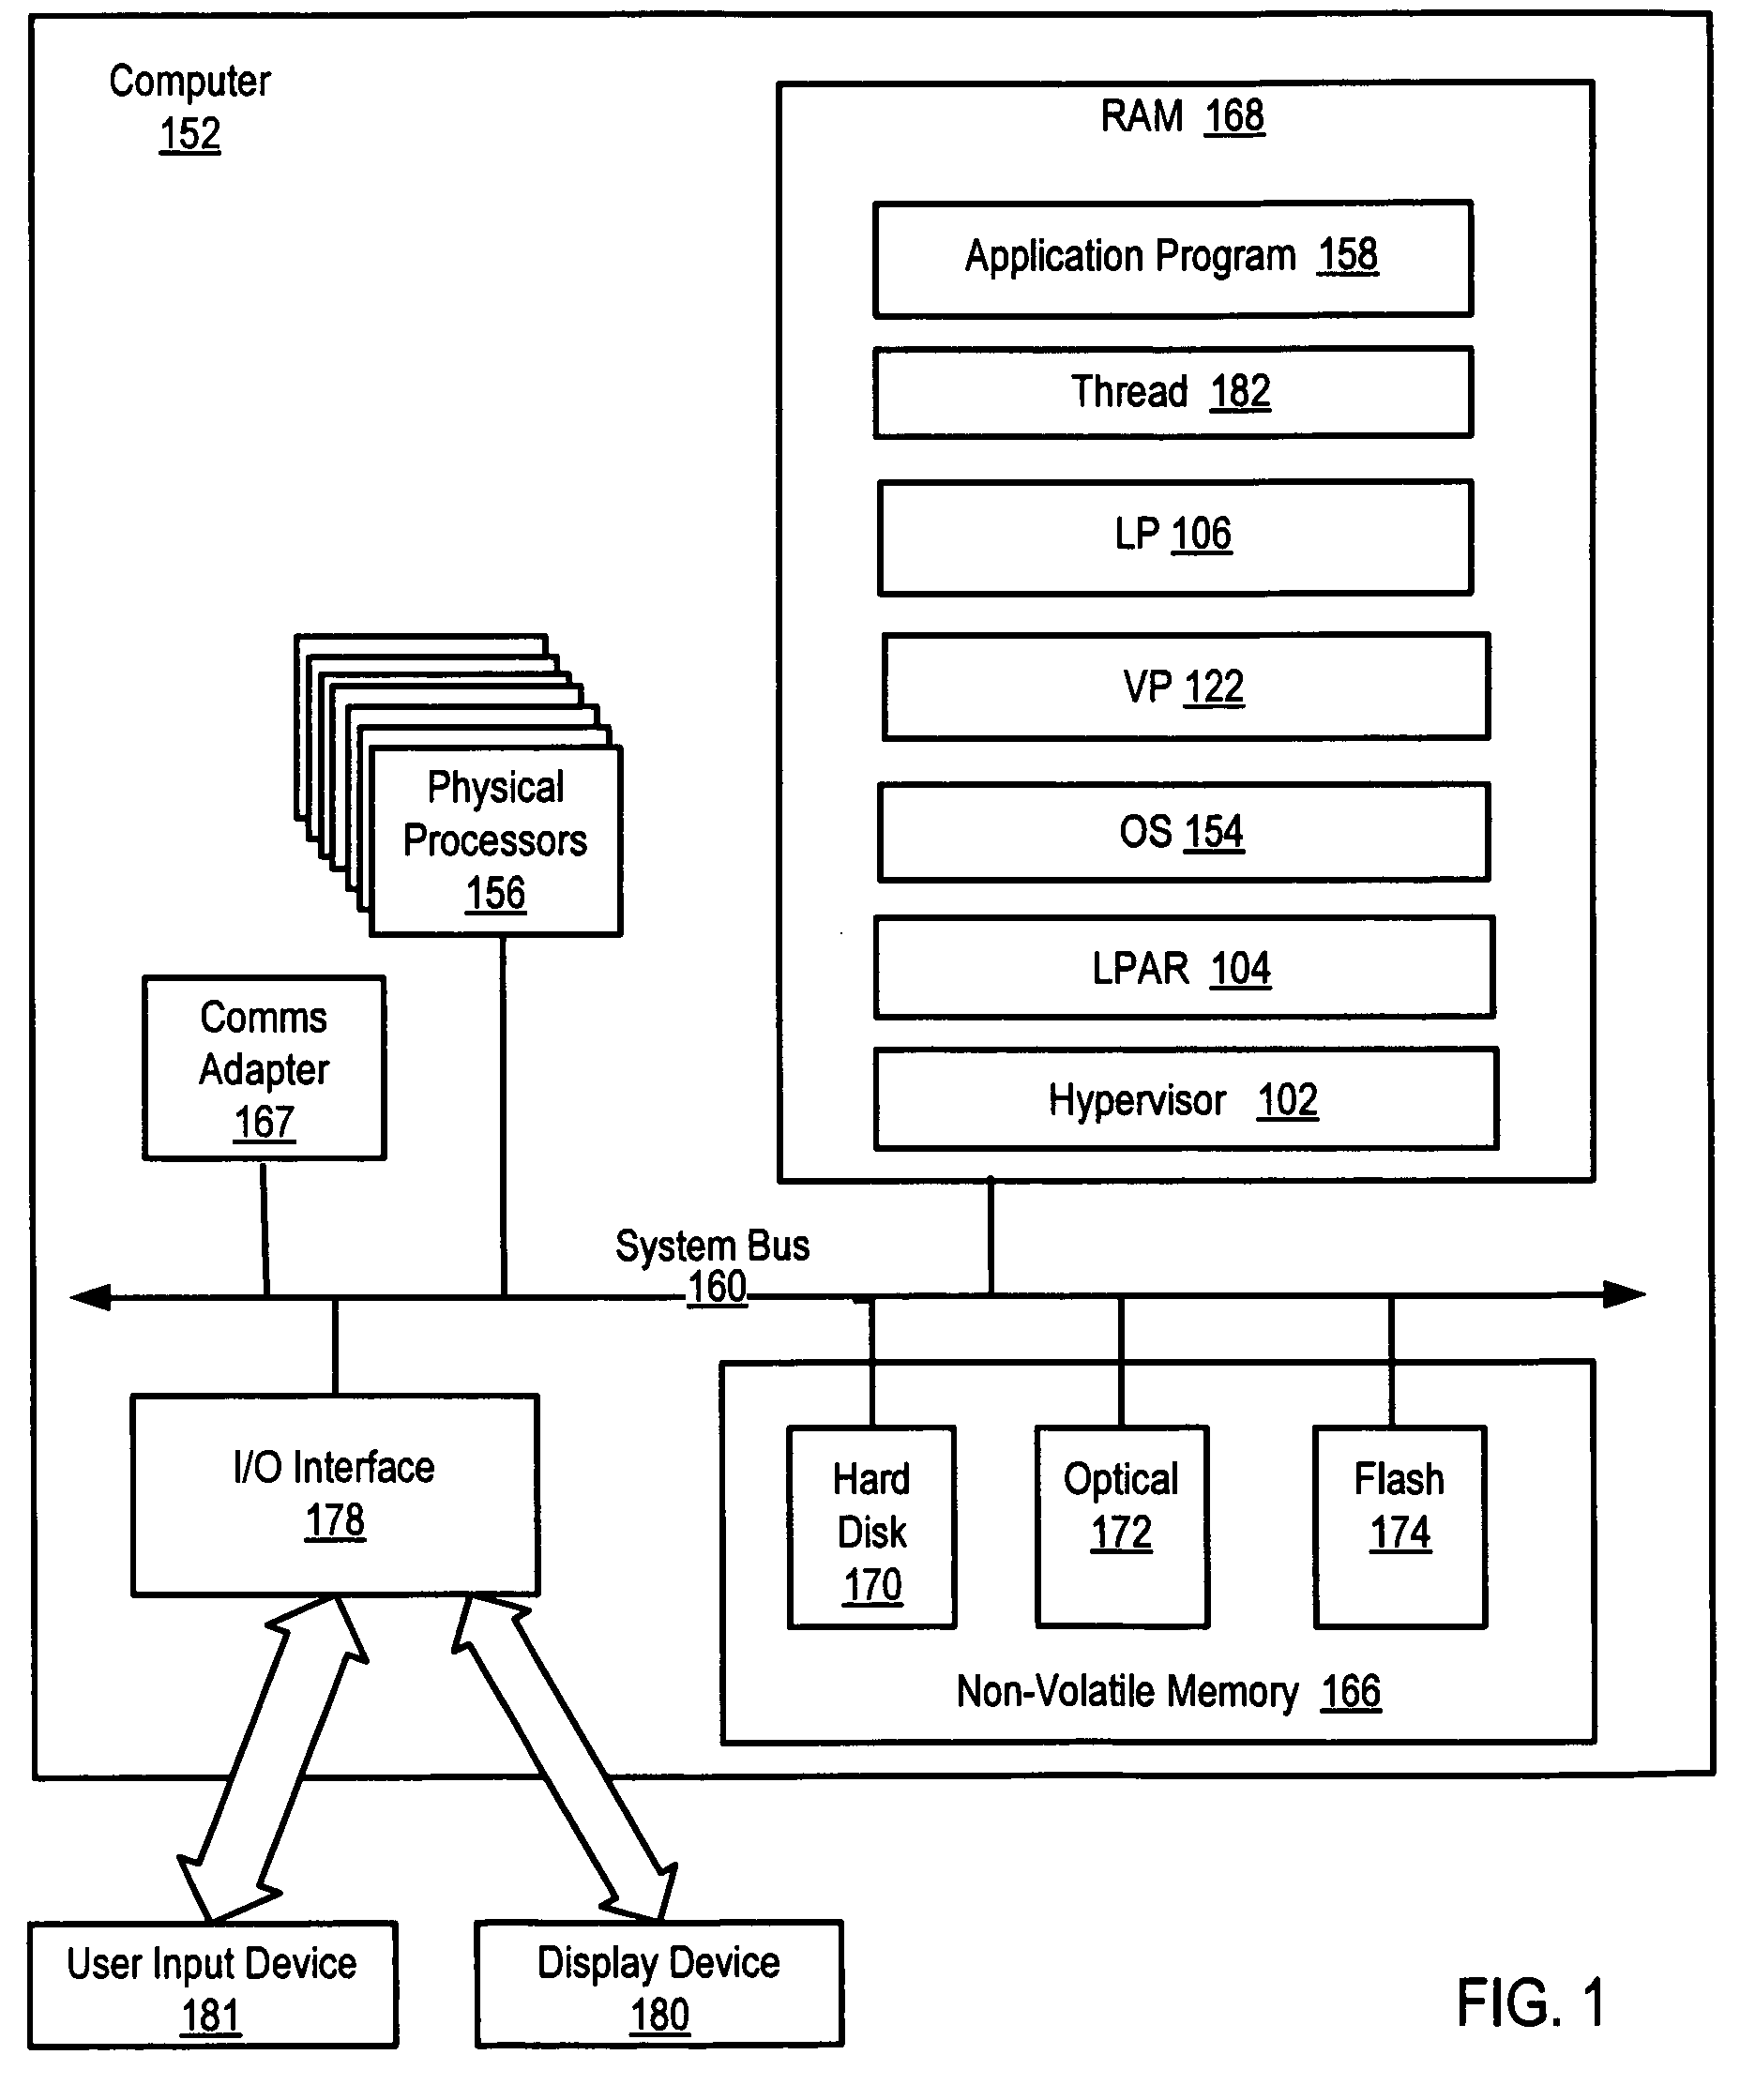 Administration of locks for critical sections of computer programs in a computer that supports a multiplicity of logical partitions